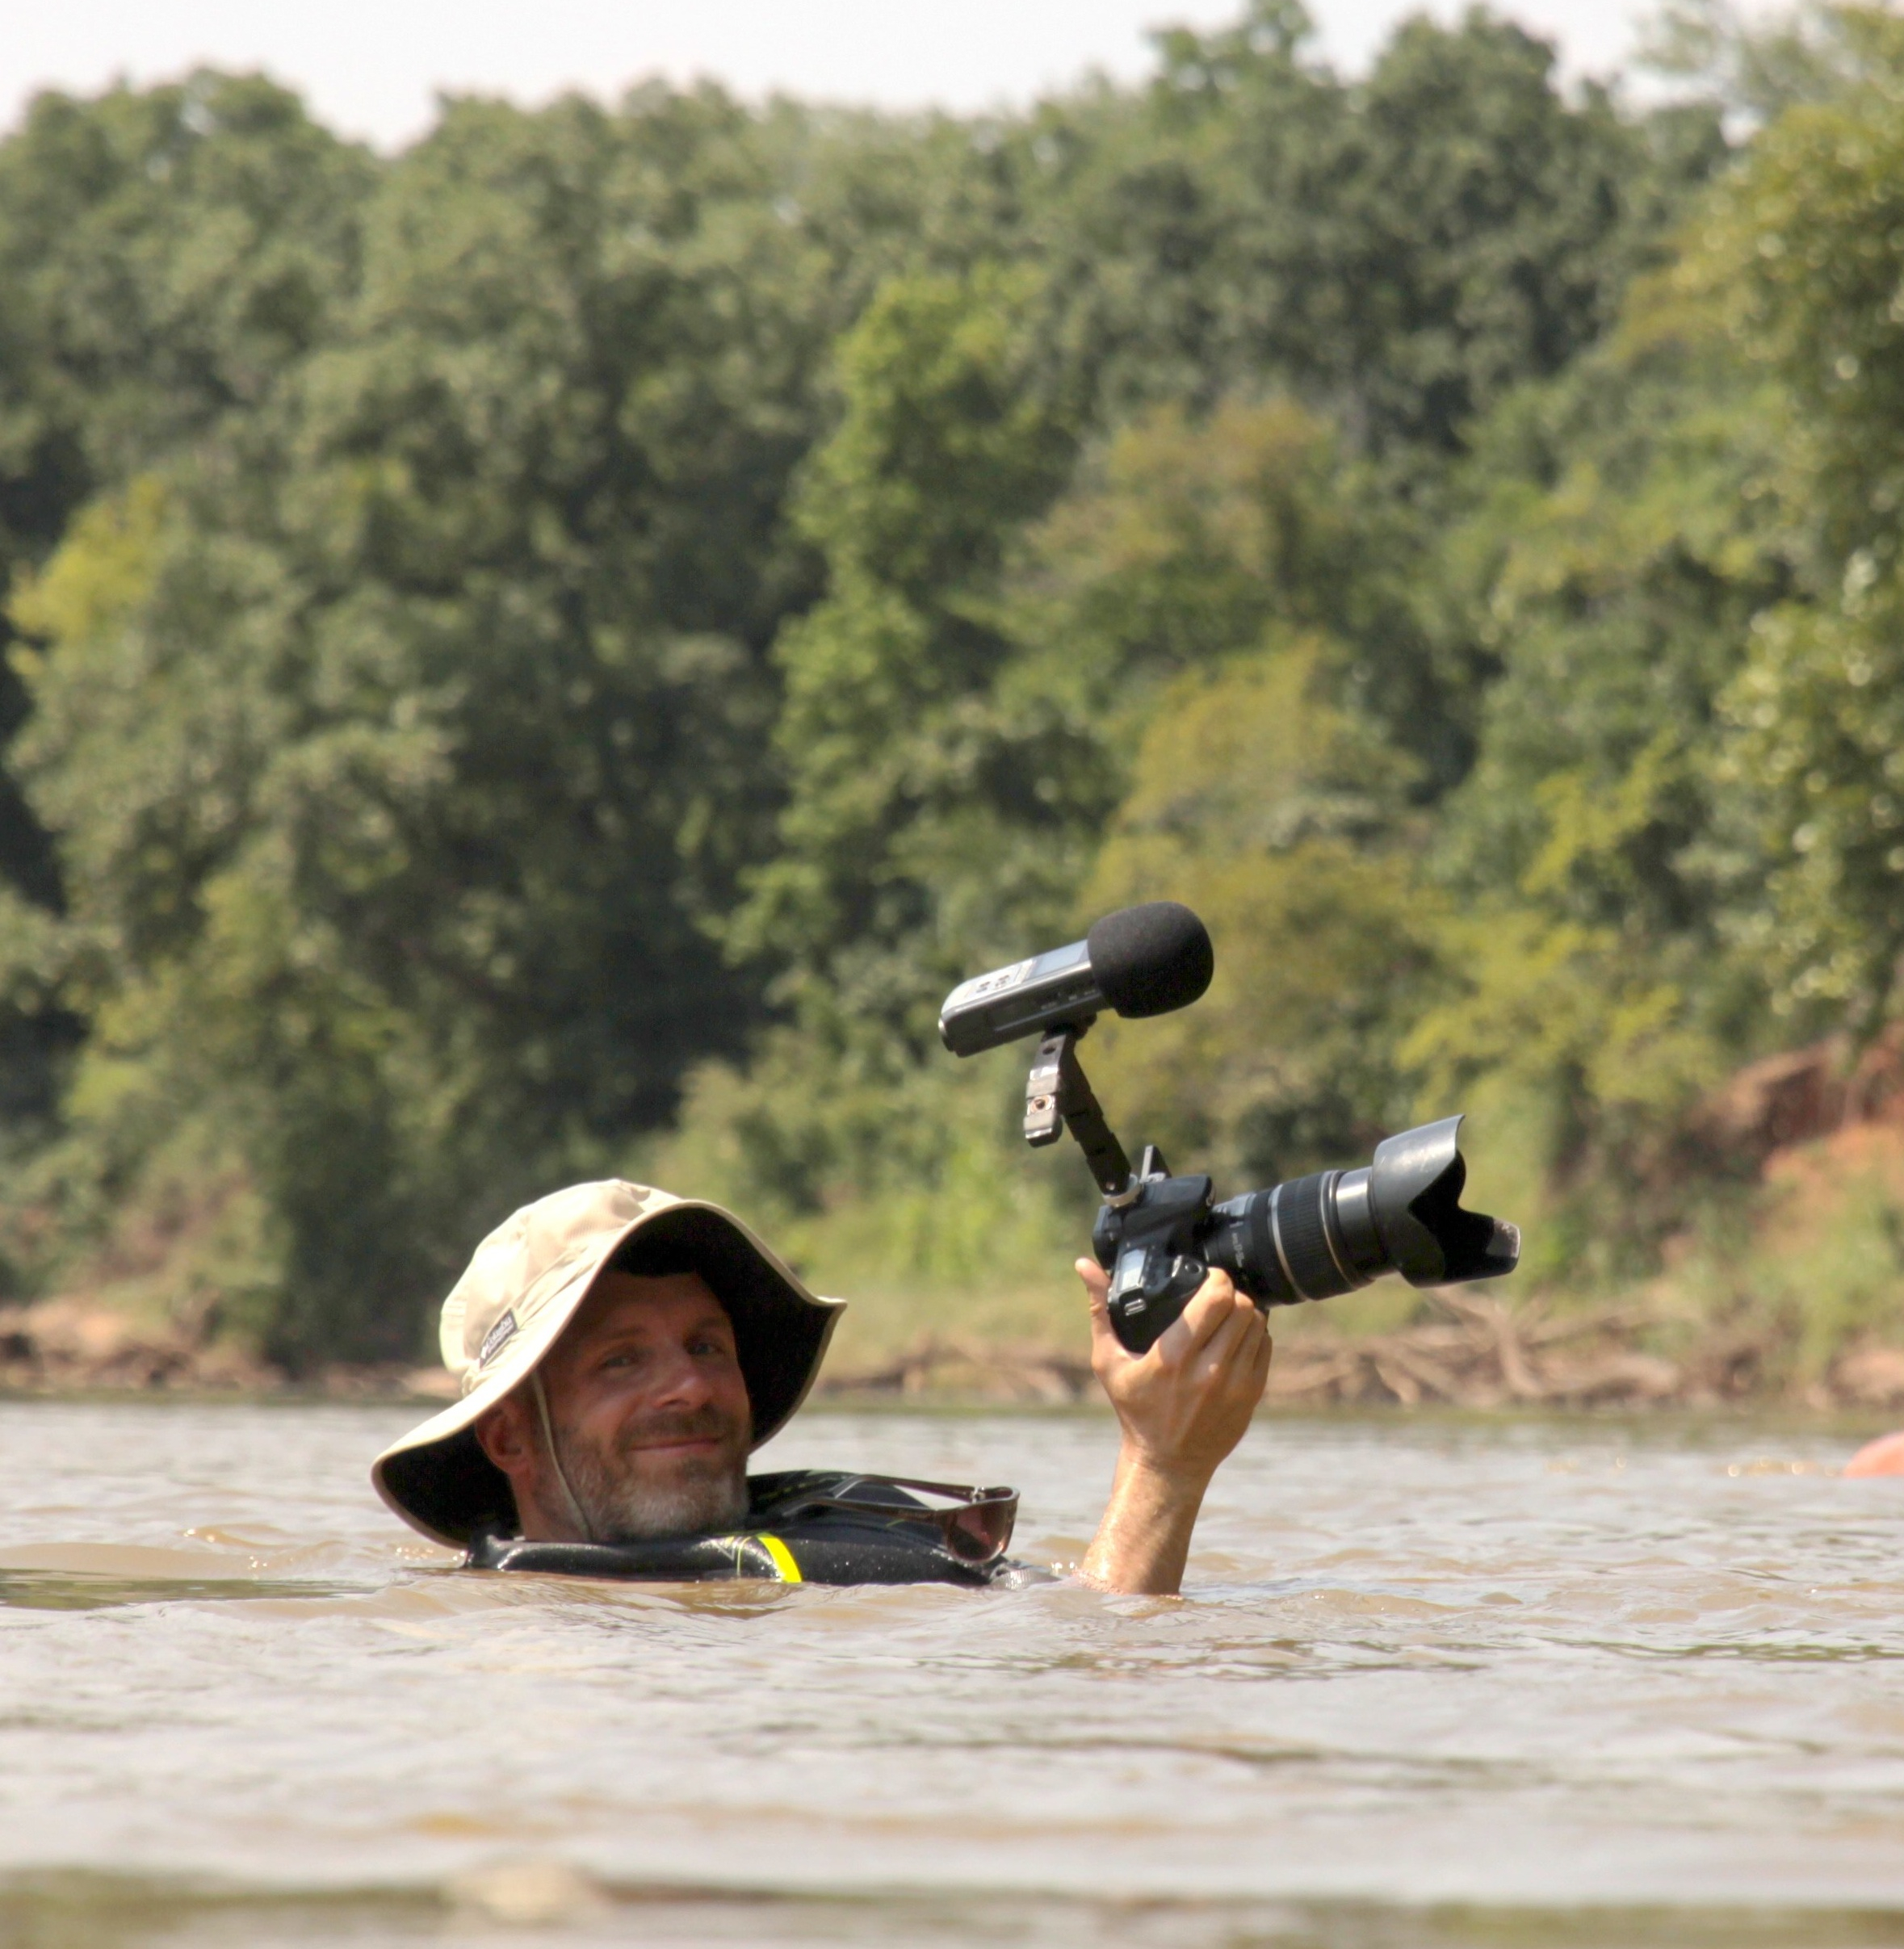 Filming Monster Catch in Oklahoma. 2014.